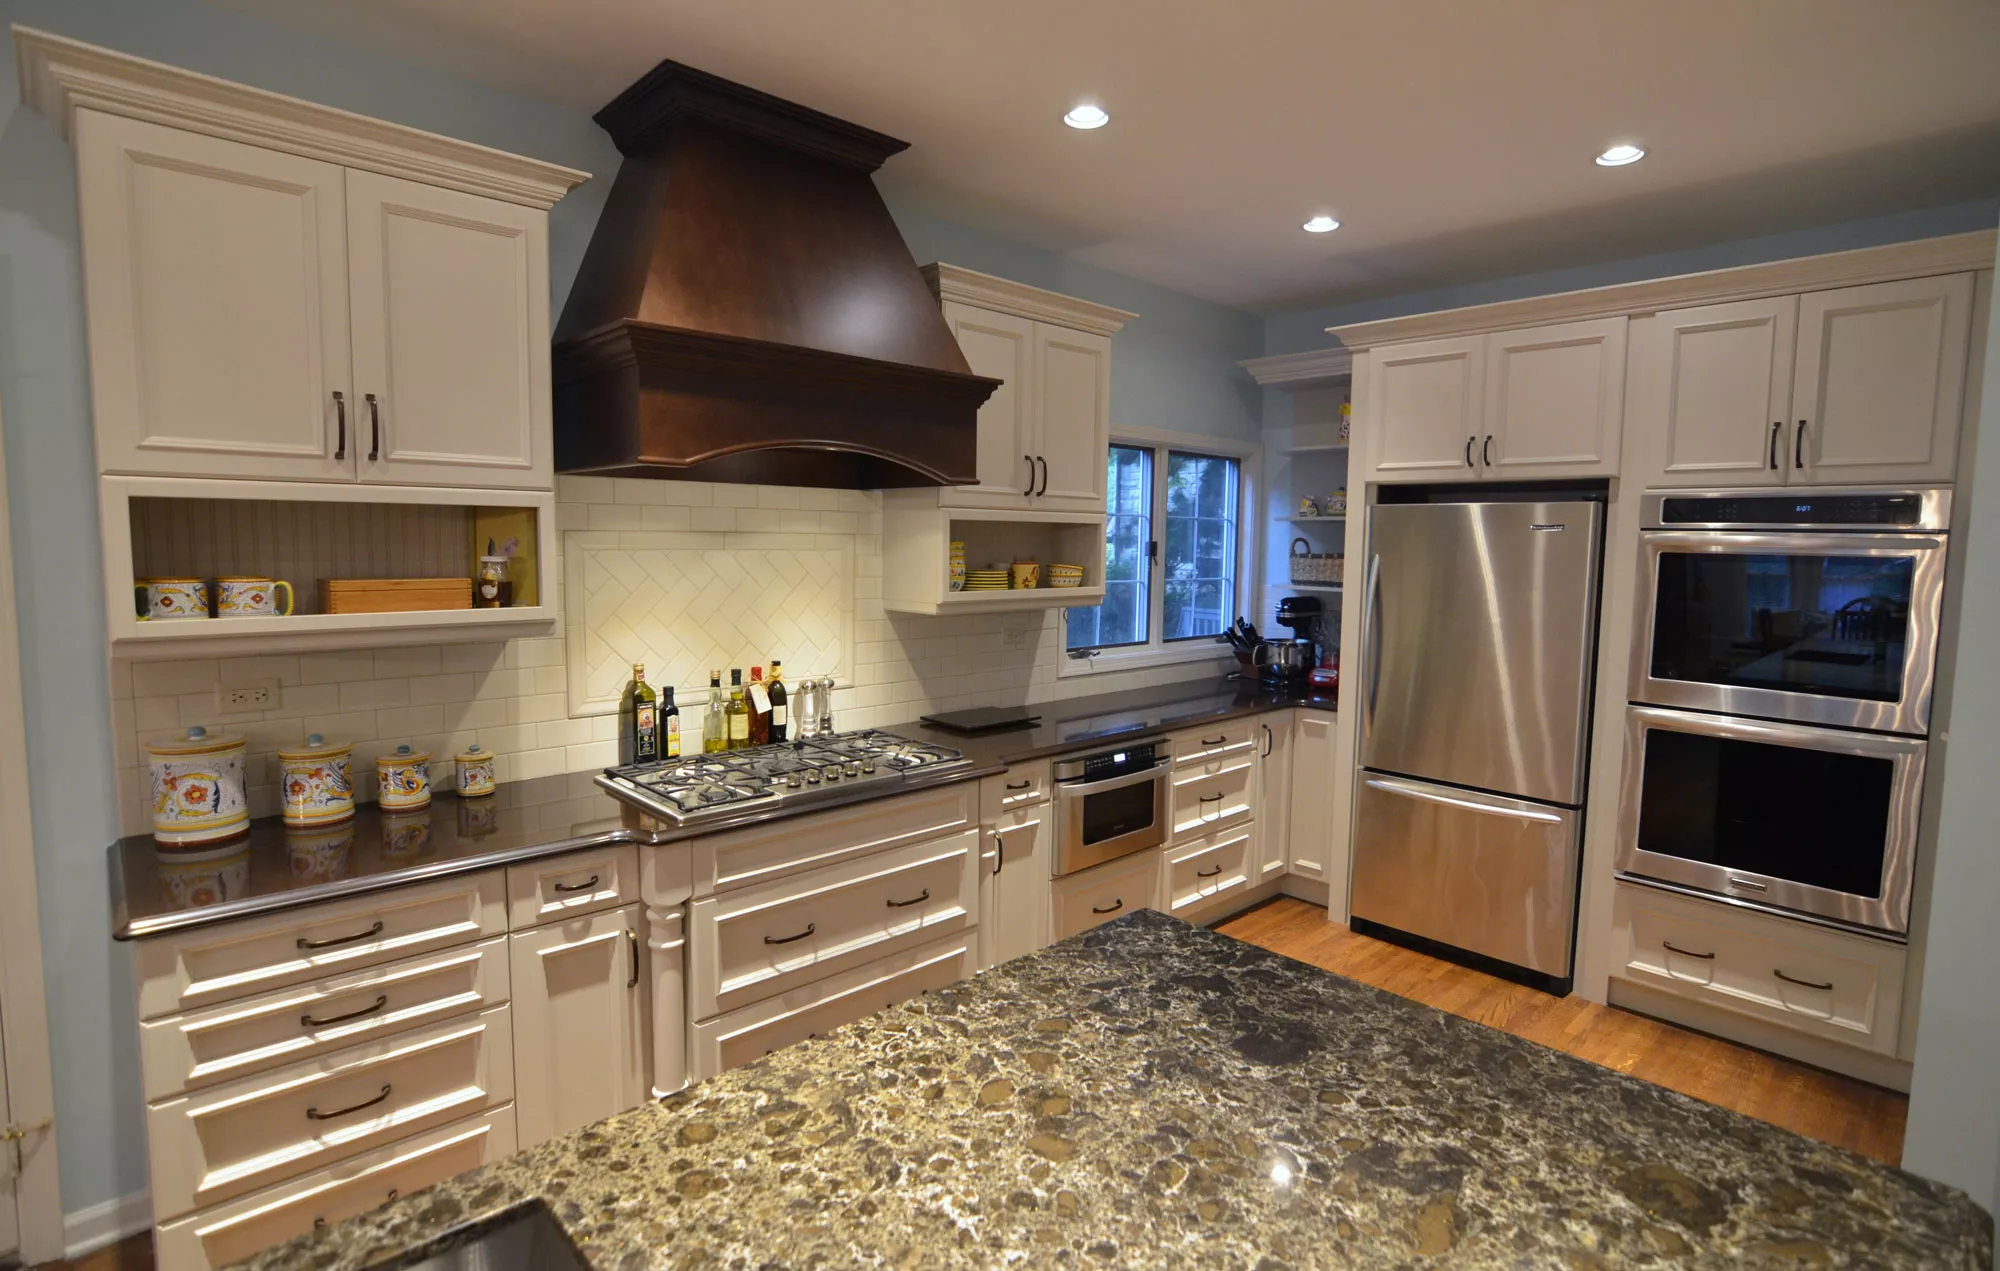 kitchen renovation hooded vent stainless steel appliances stone countertops the kitchen master